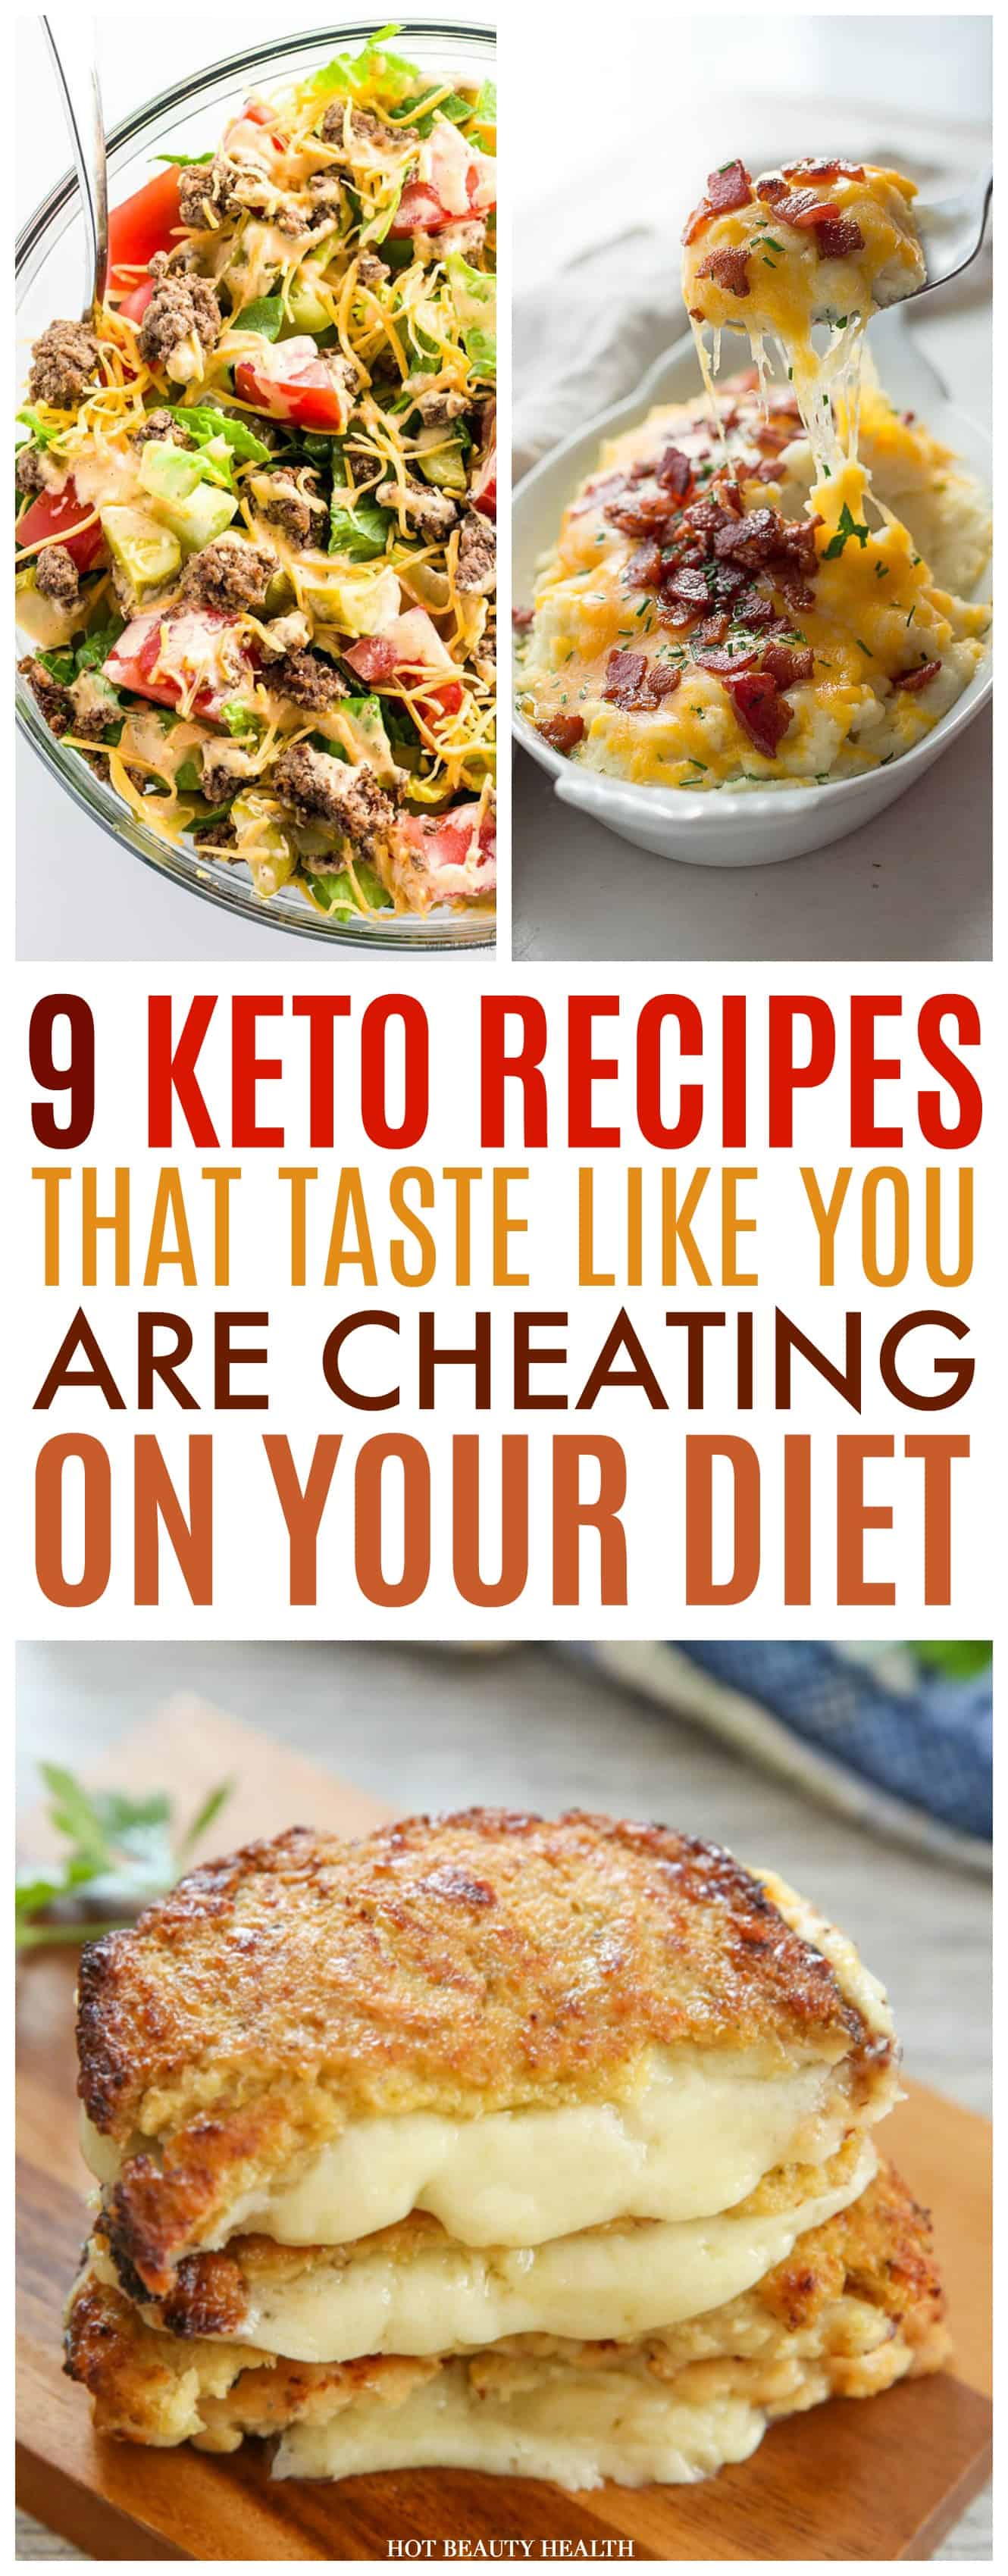 These 9 Ketogenic recipes are some of the best recipes I found on the internet. This keto diet will help you with losing weight and I share some of my favorite flavorful breakfast, lunch, dinner, and even dessert recipes you’ll love.